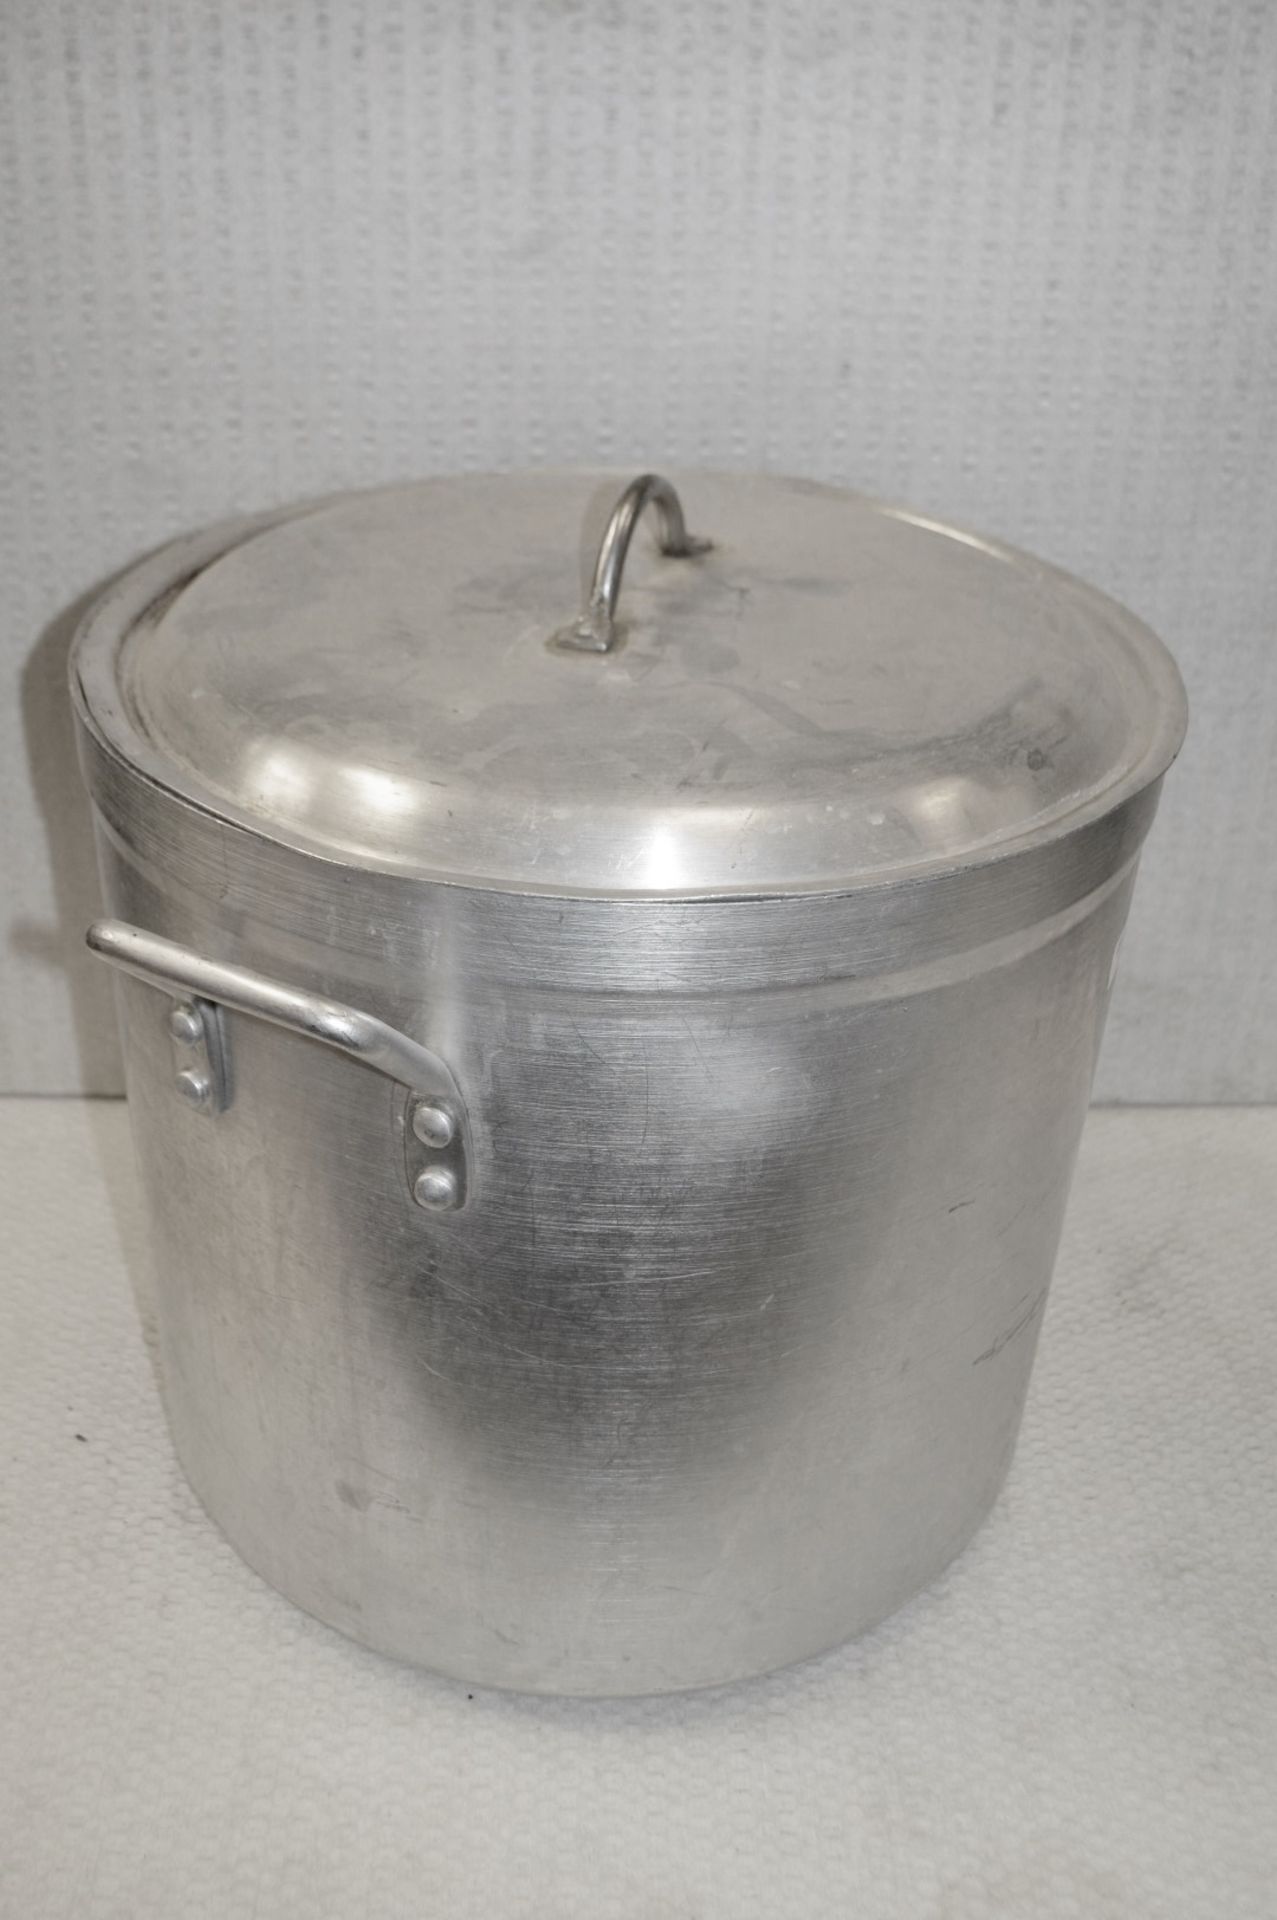 1 x Large Stainless Steel Cooking Pan With Lid - Dimensions: L41 x W41 x D37cm - Recently Removed